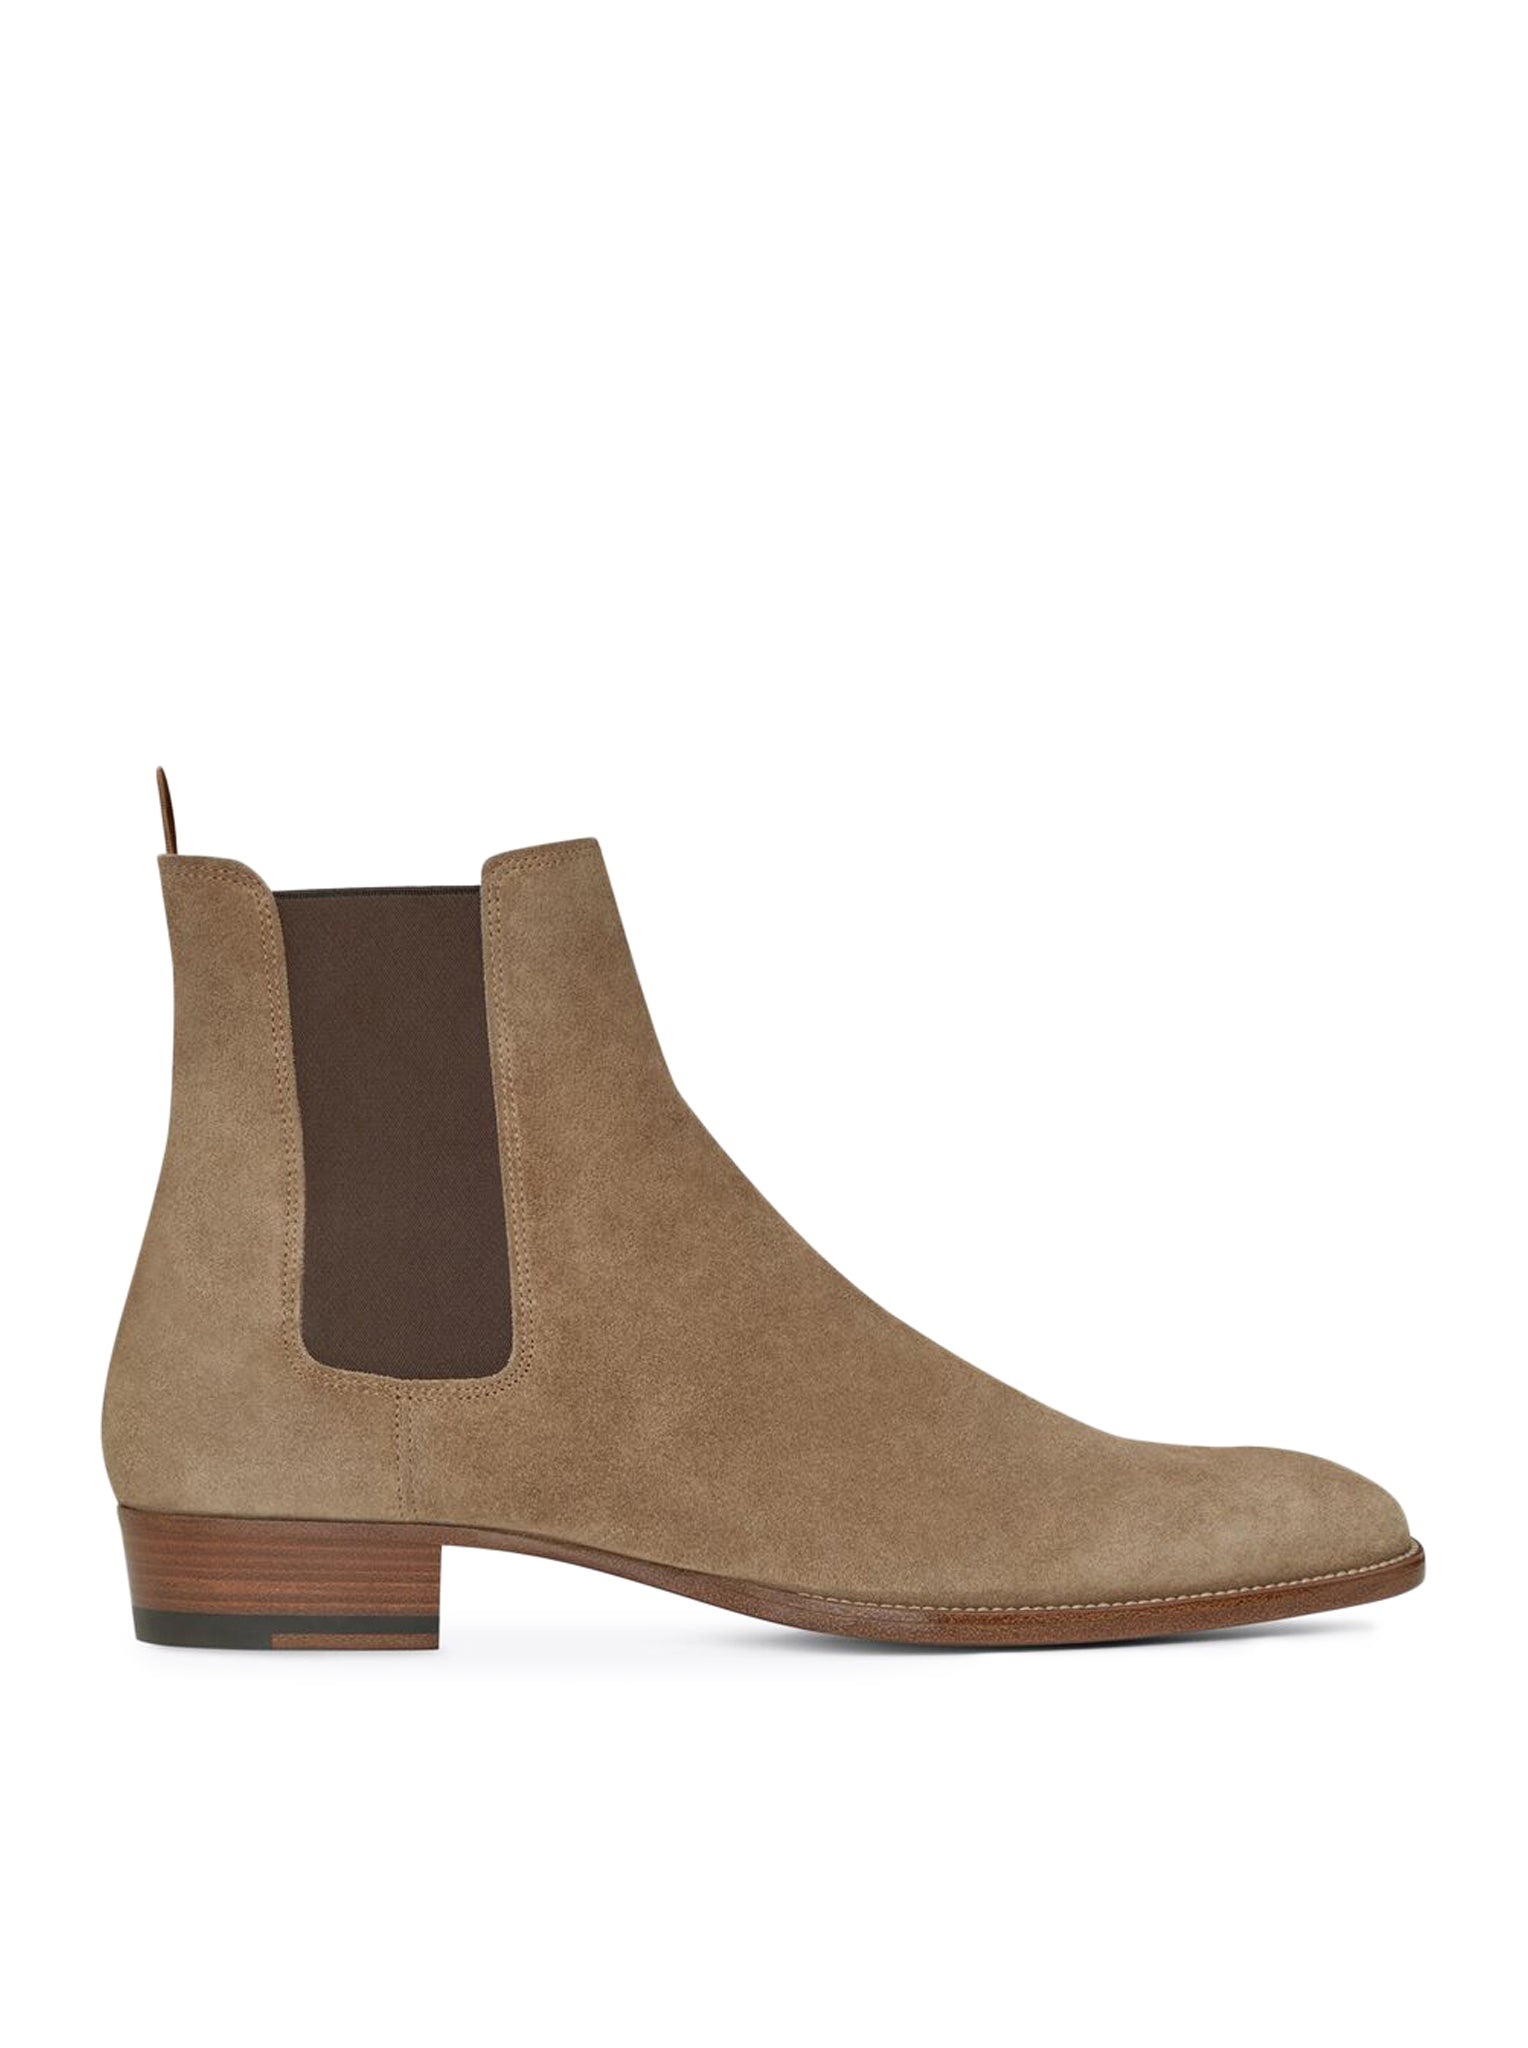 TOBACCO-COLORED WYATT 30 CHELSEA BOOTS IN SUEDE - 1